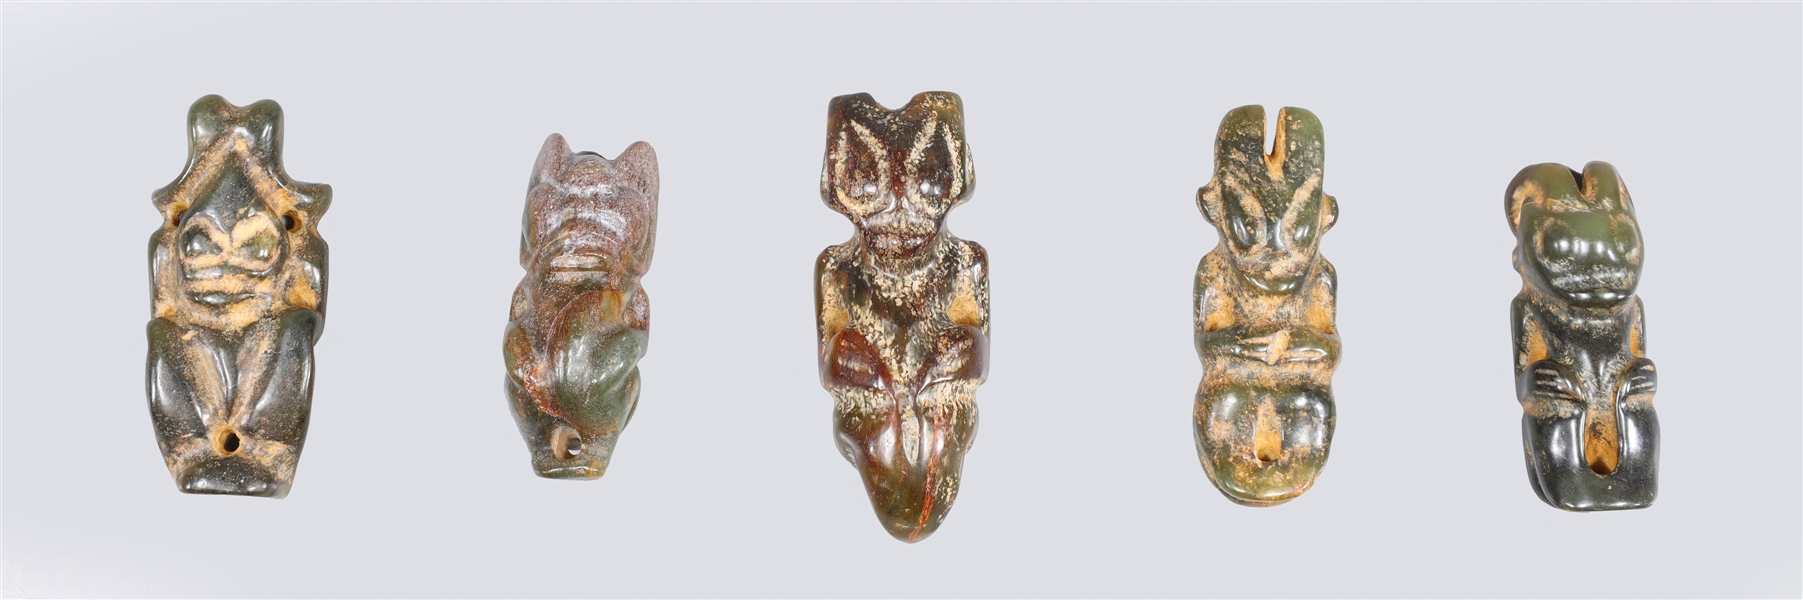 Group of Five Archaic Chinese Style Carved Hardstone Figures